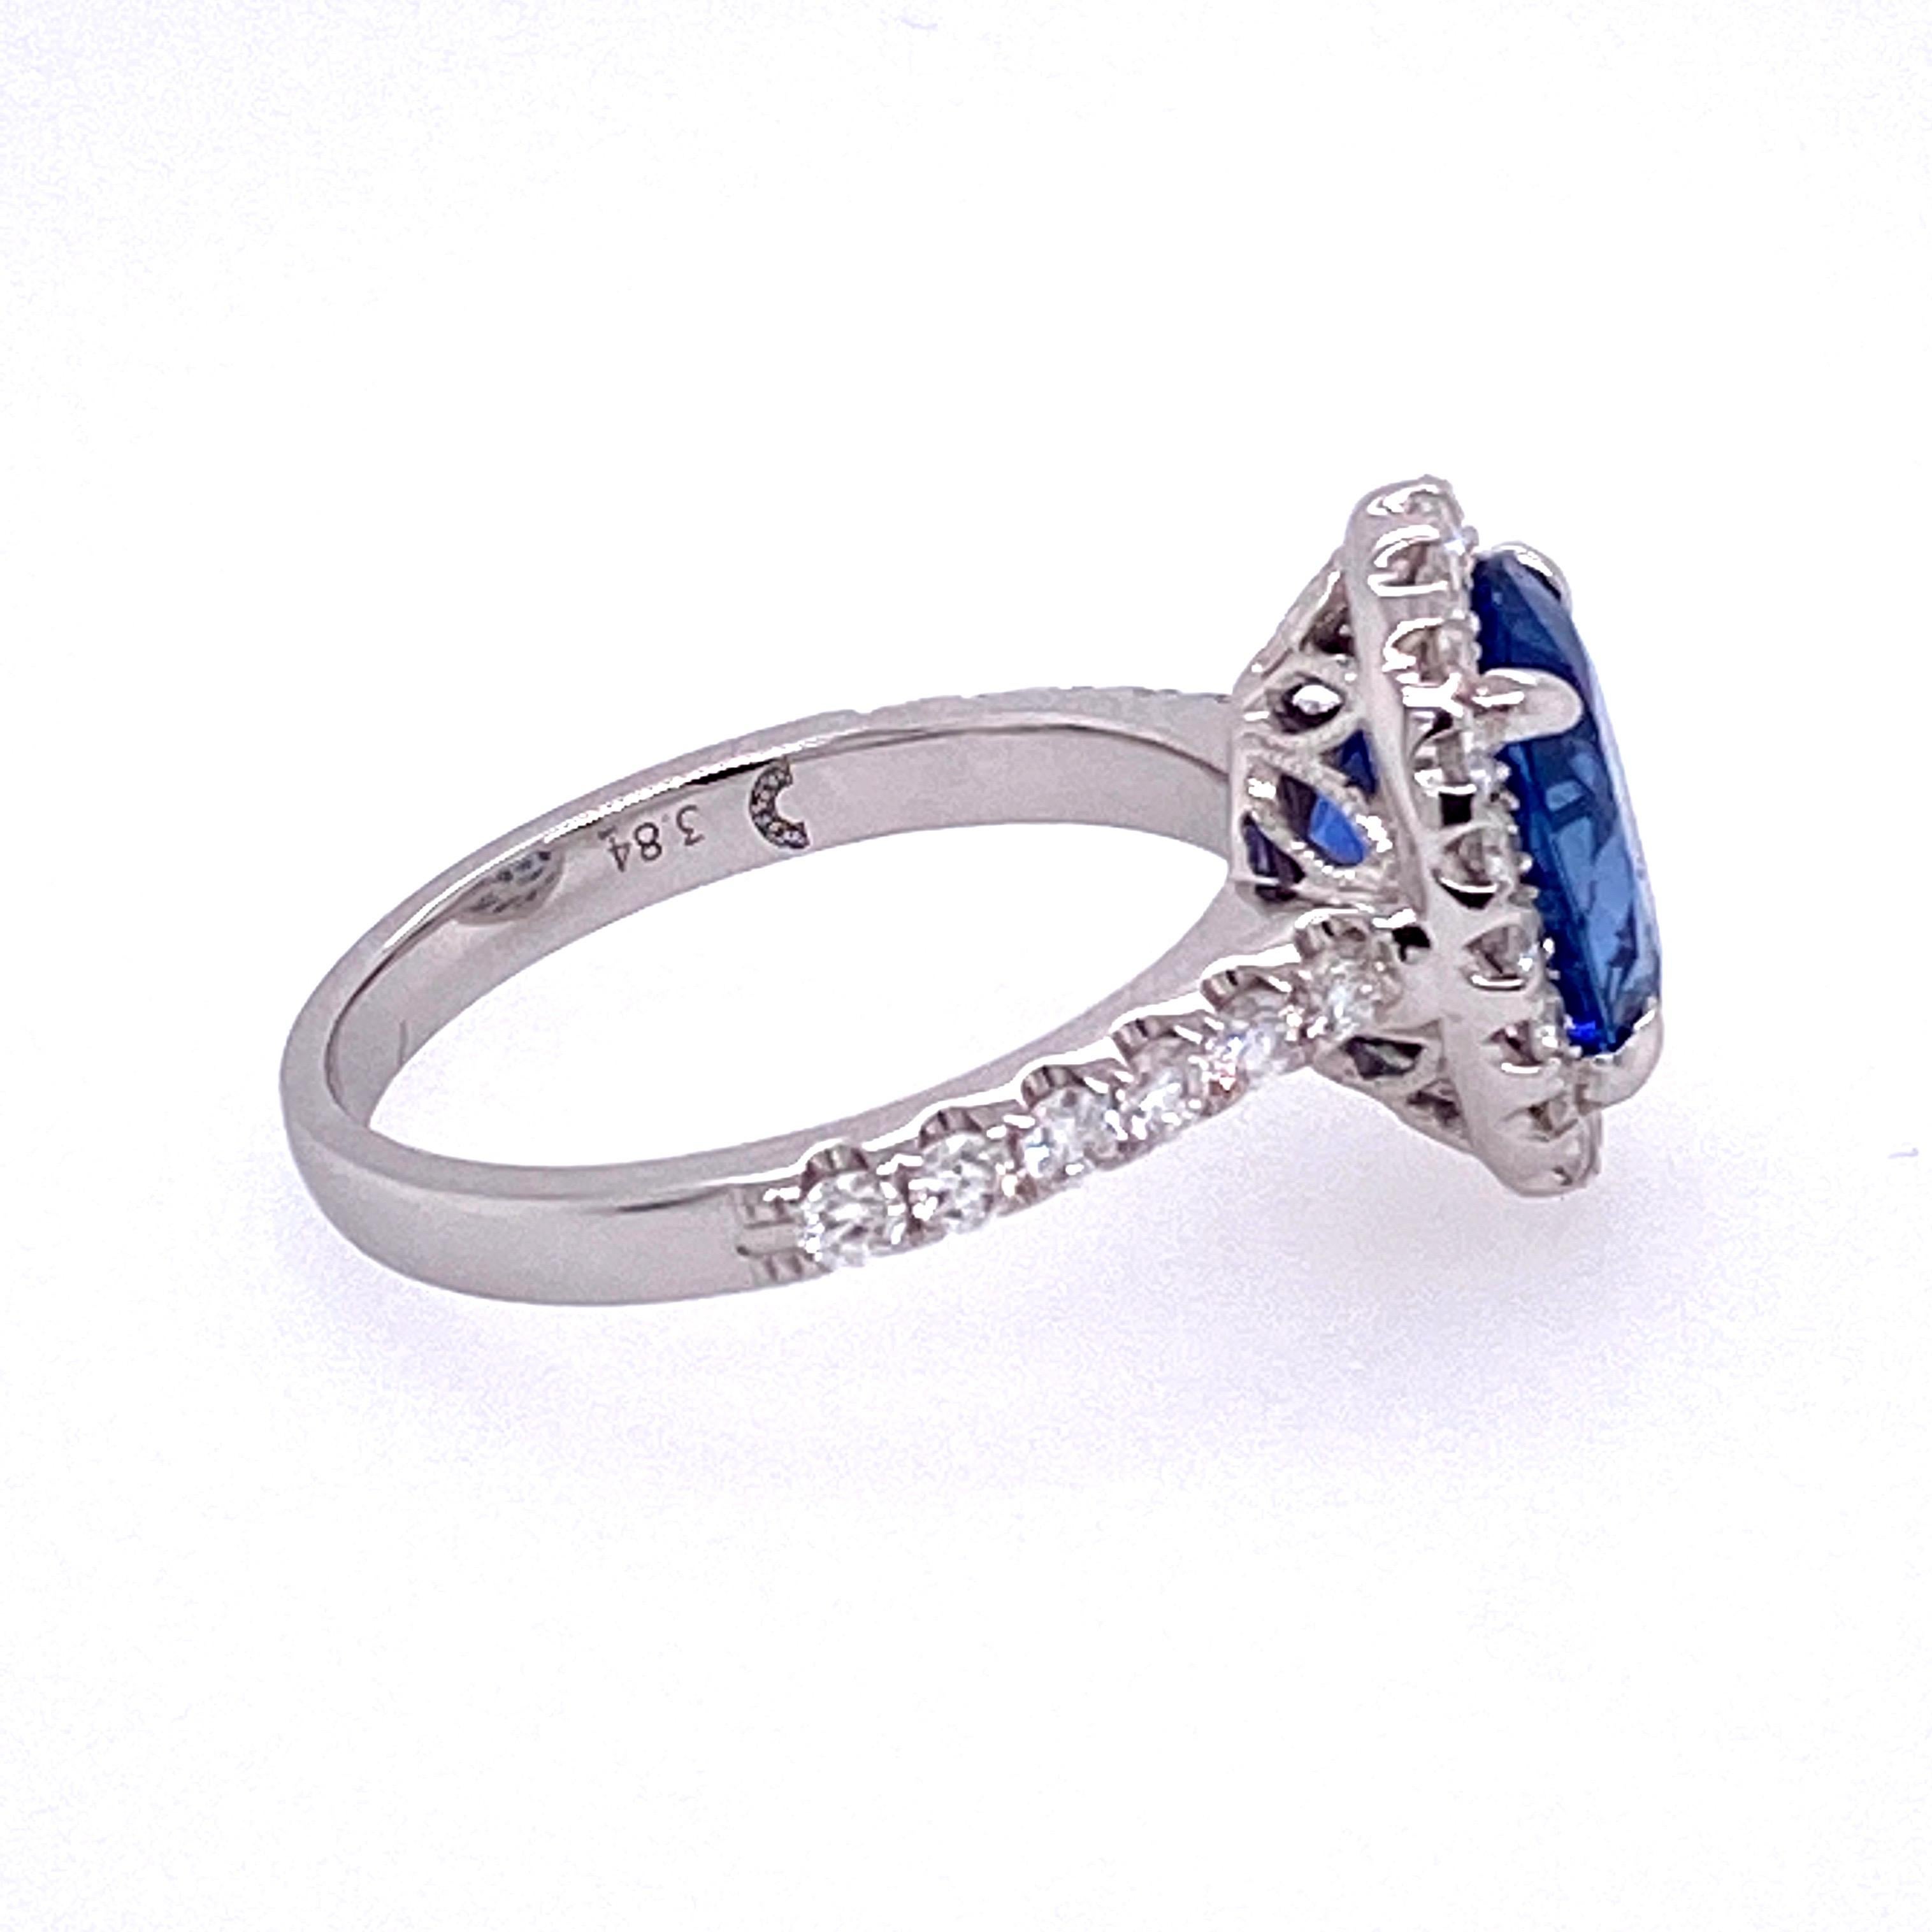 Women's 3.84 Carat Oval Sapphire and Diamond Cocktail Ring